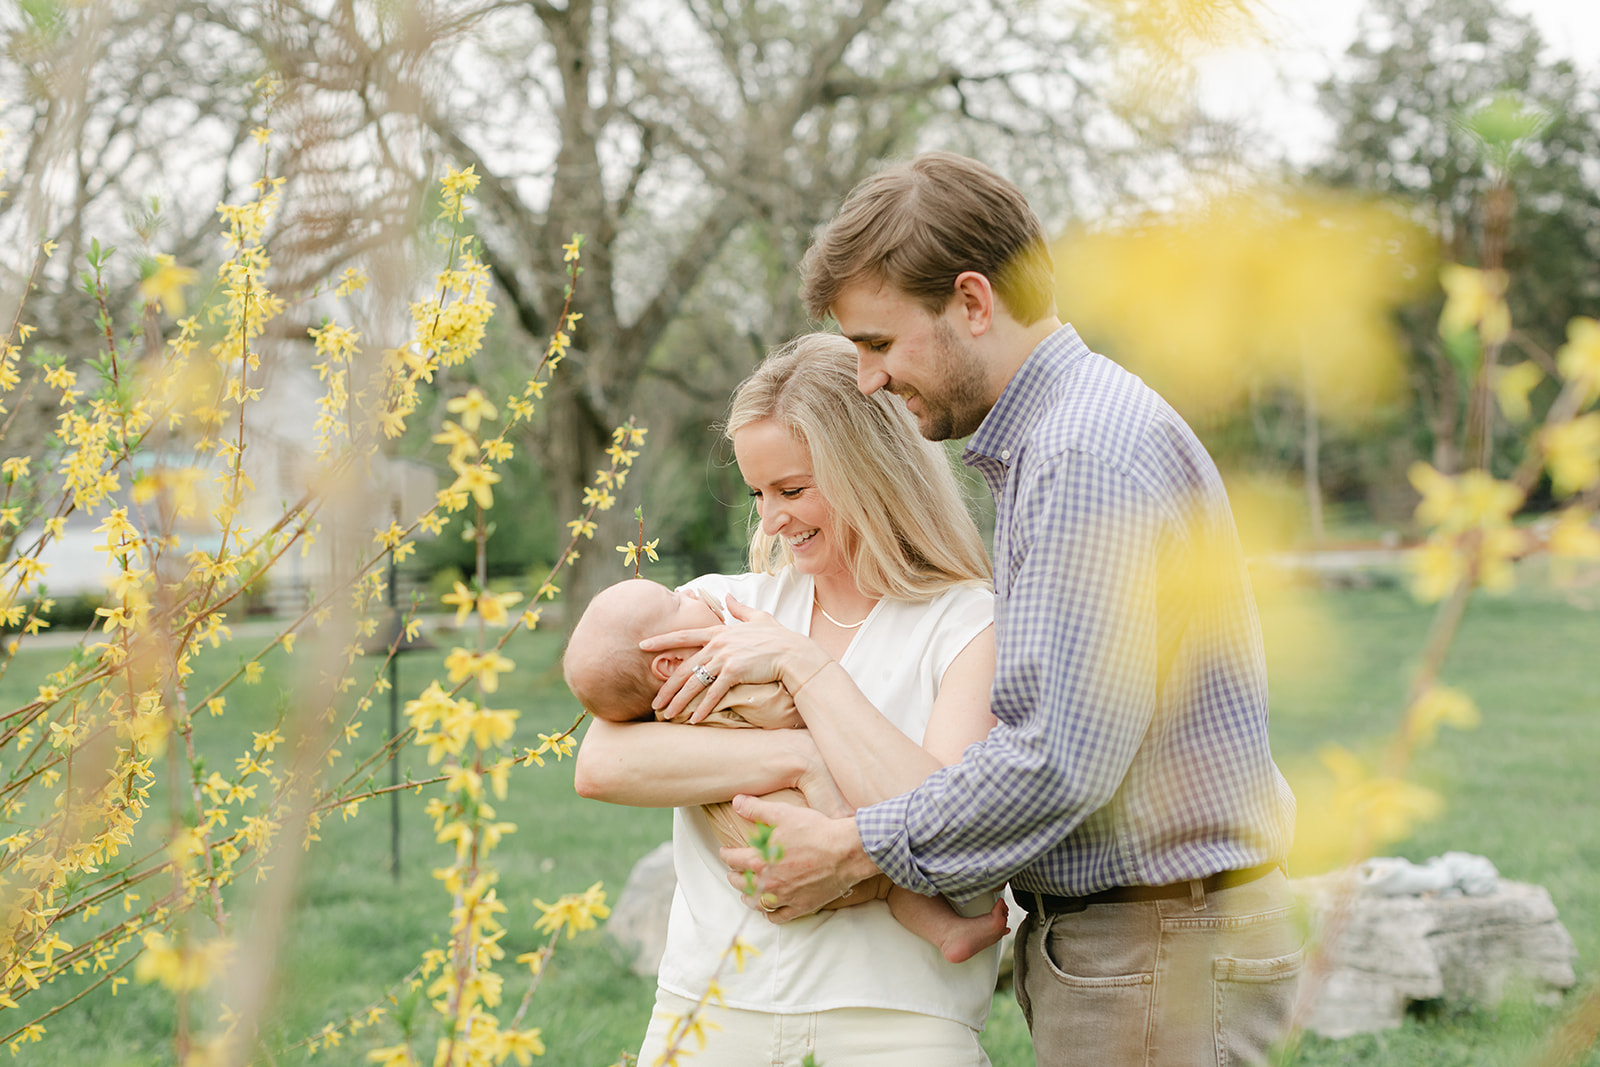 baby Charolette's 3 month milestone session in Nashville, Tennessee.